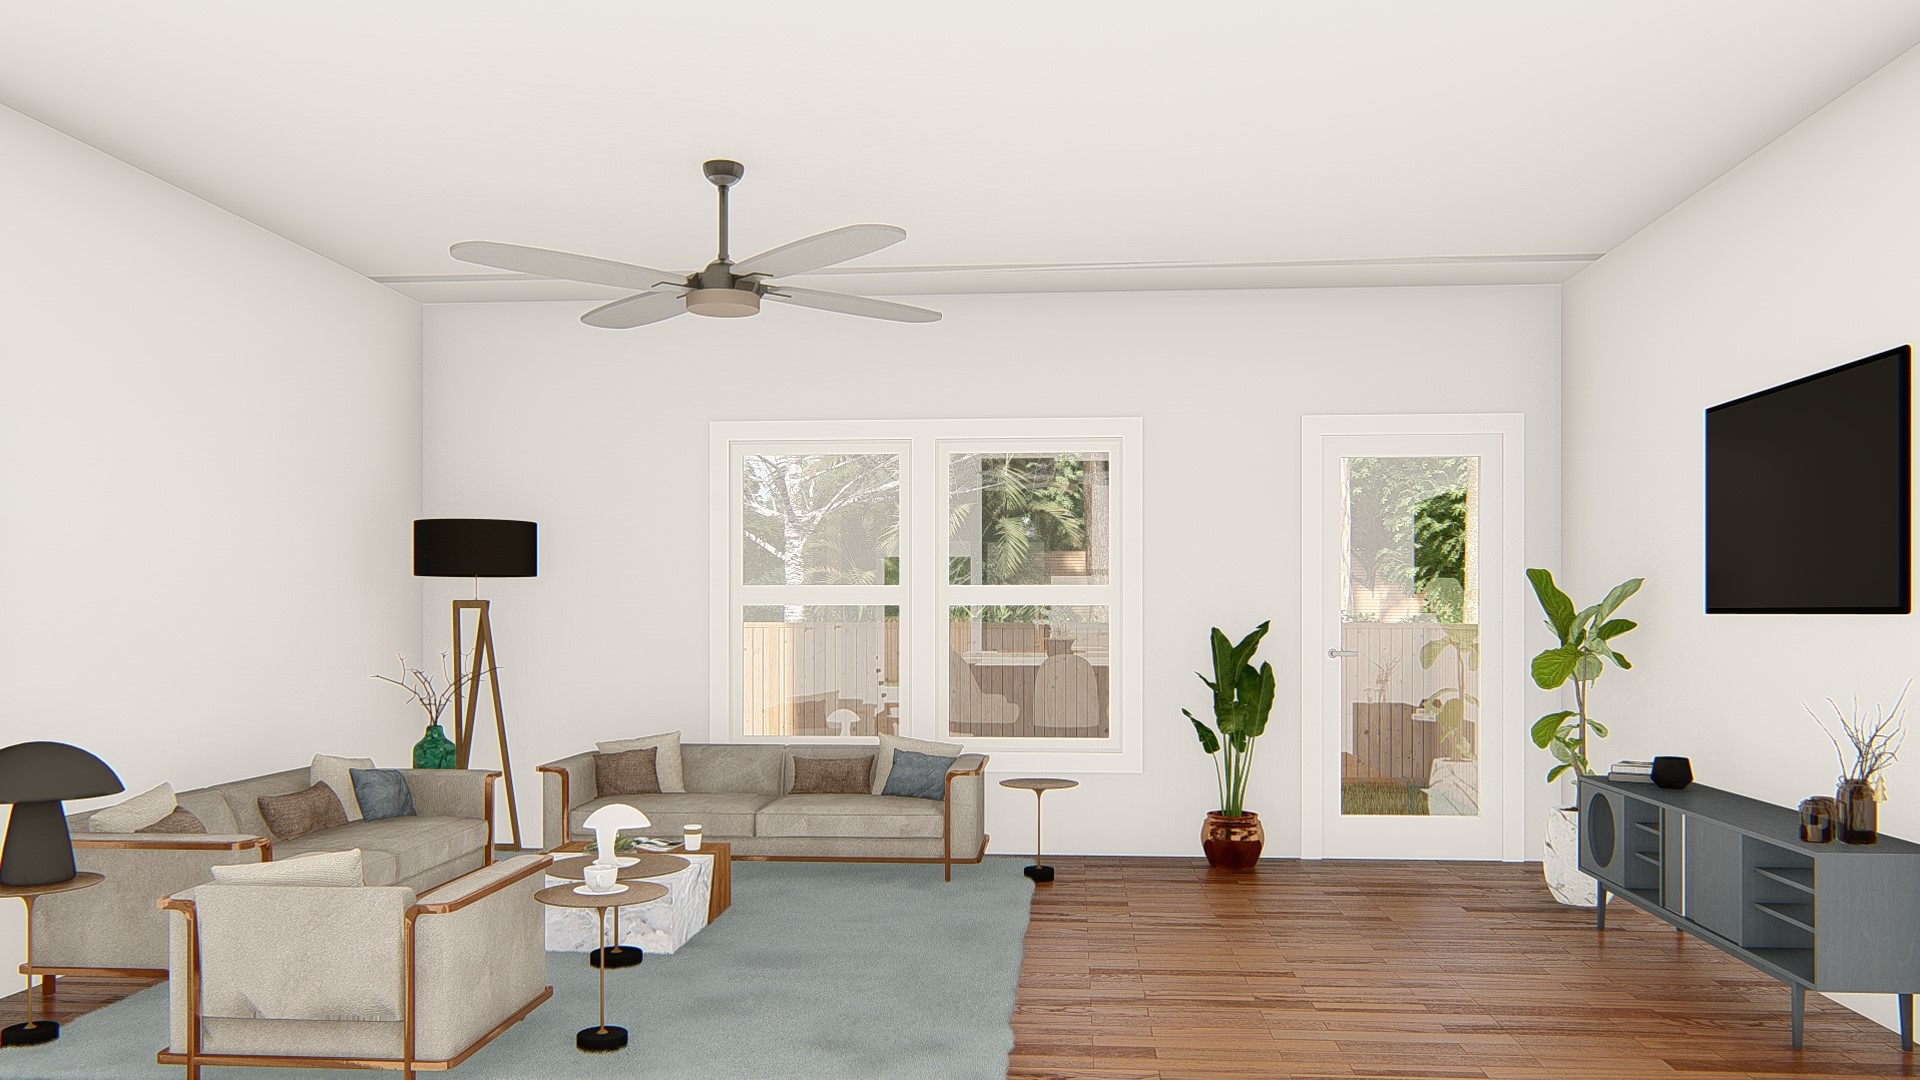 LIVING ROOM.  This image is a close rendering of the final product